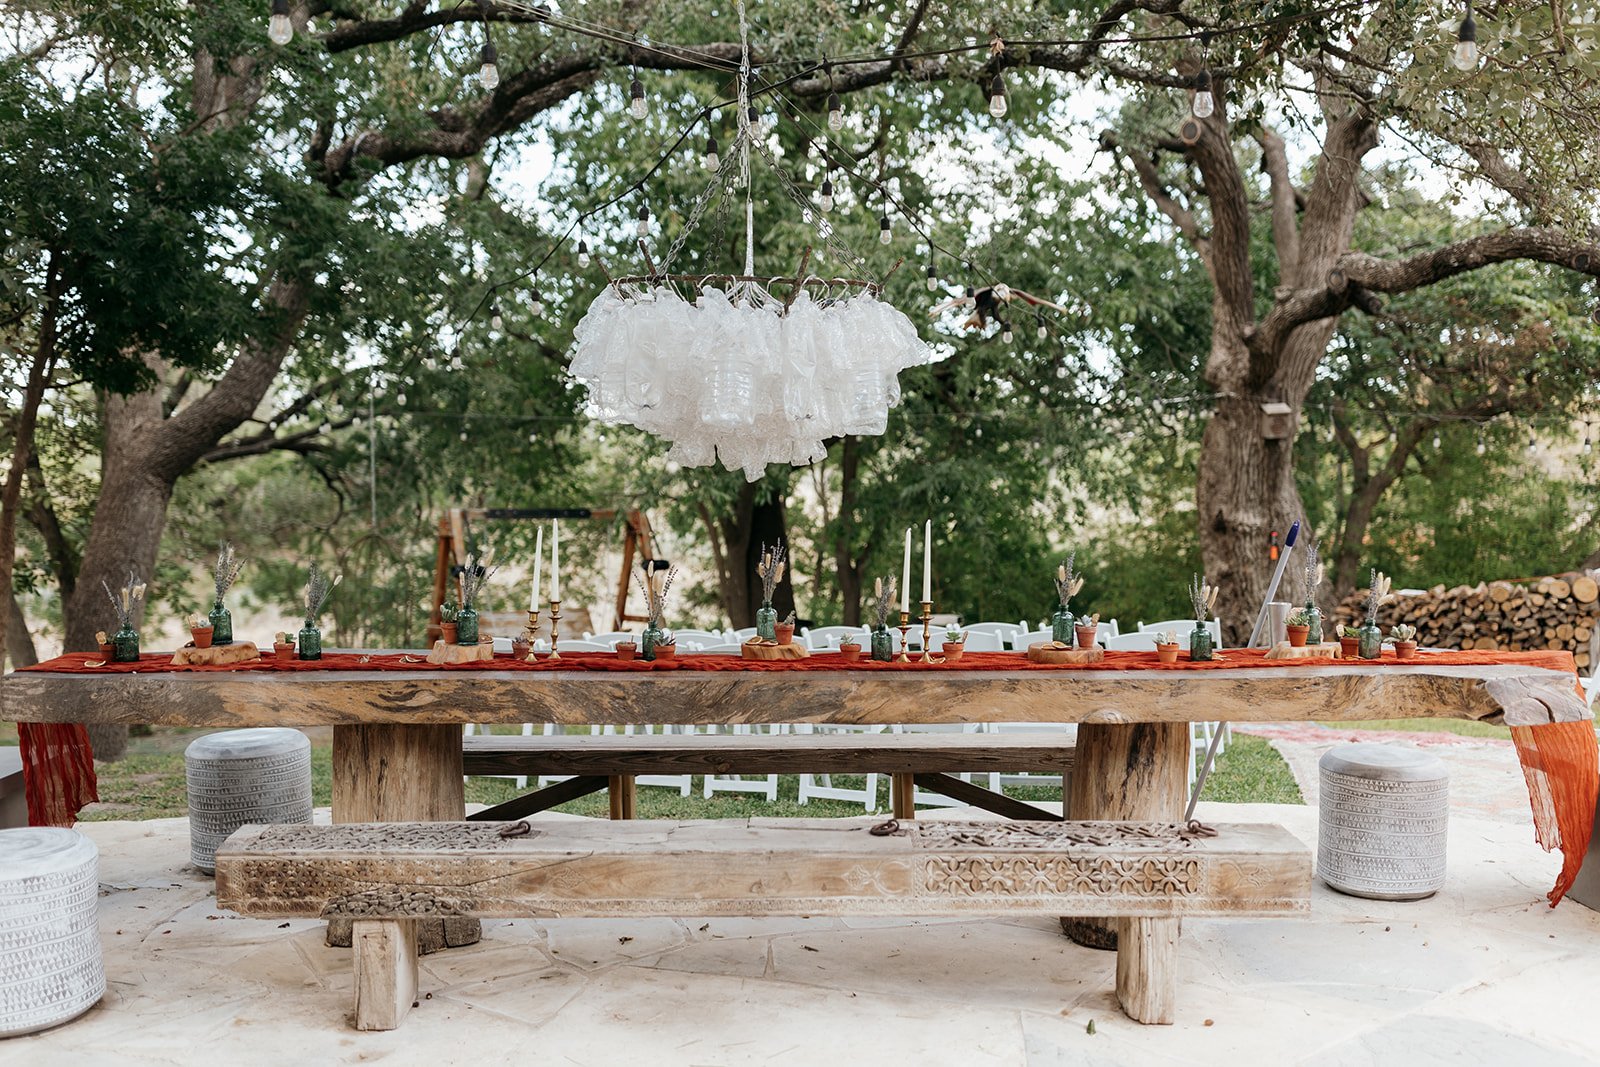 A beautiful chandelier hangs from the trees above the intimate wedding table setting